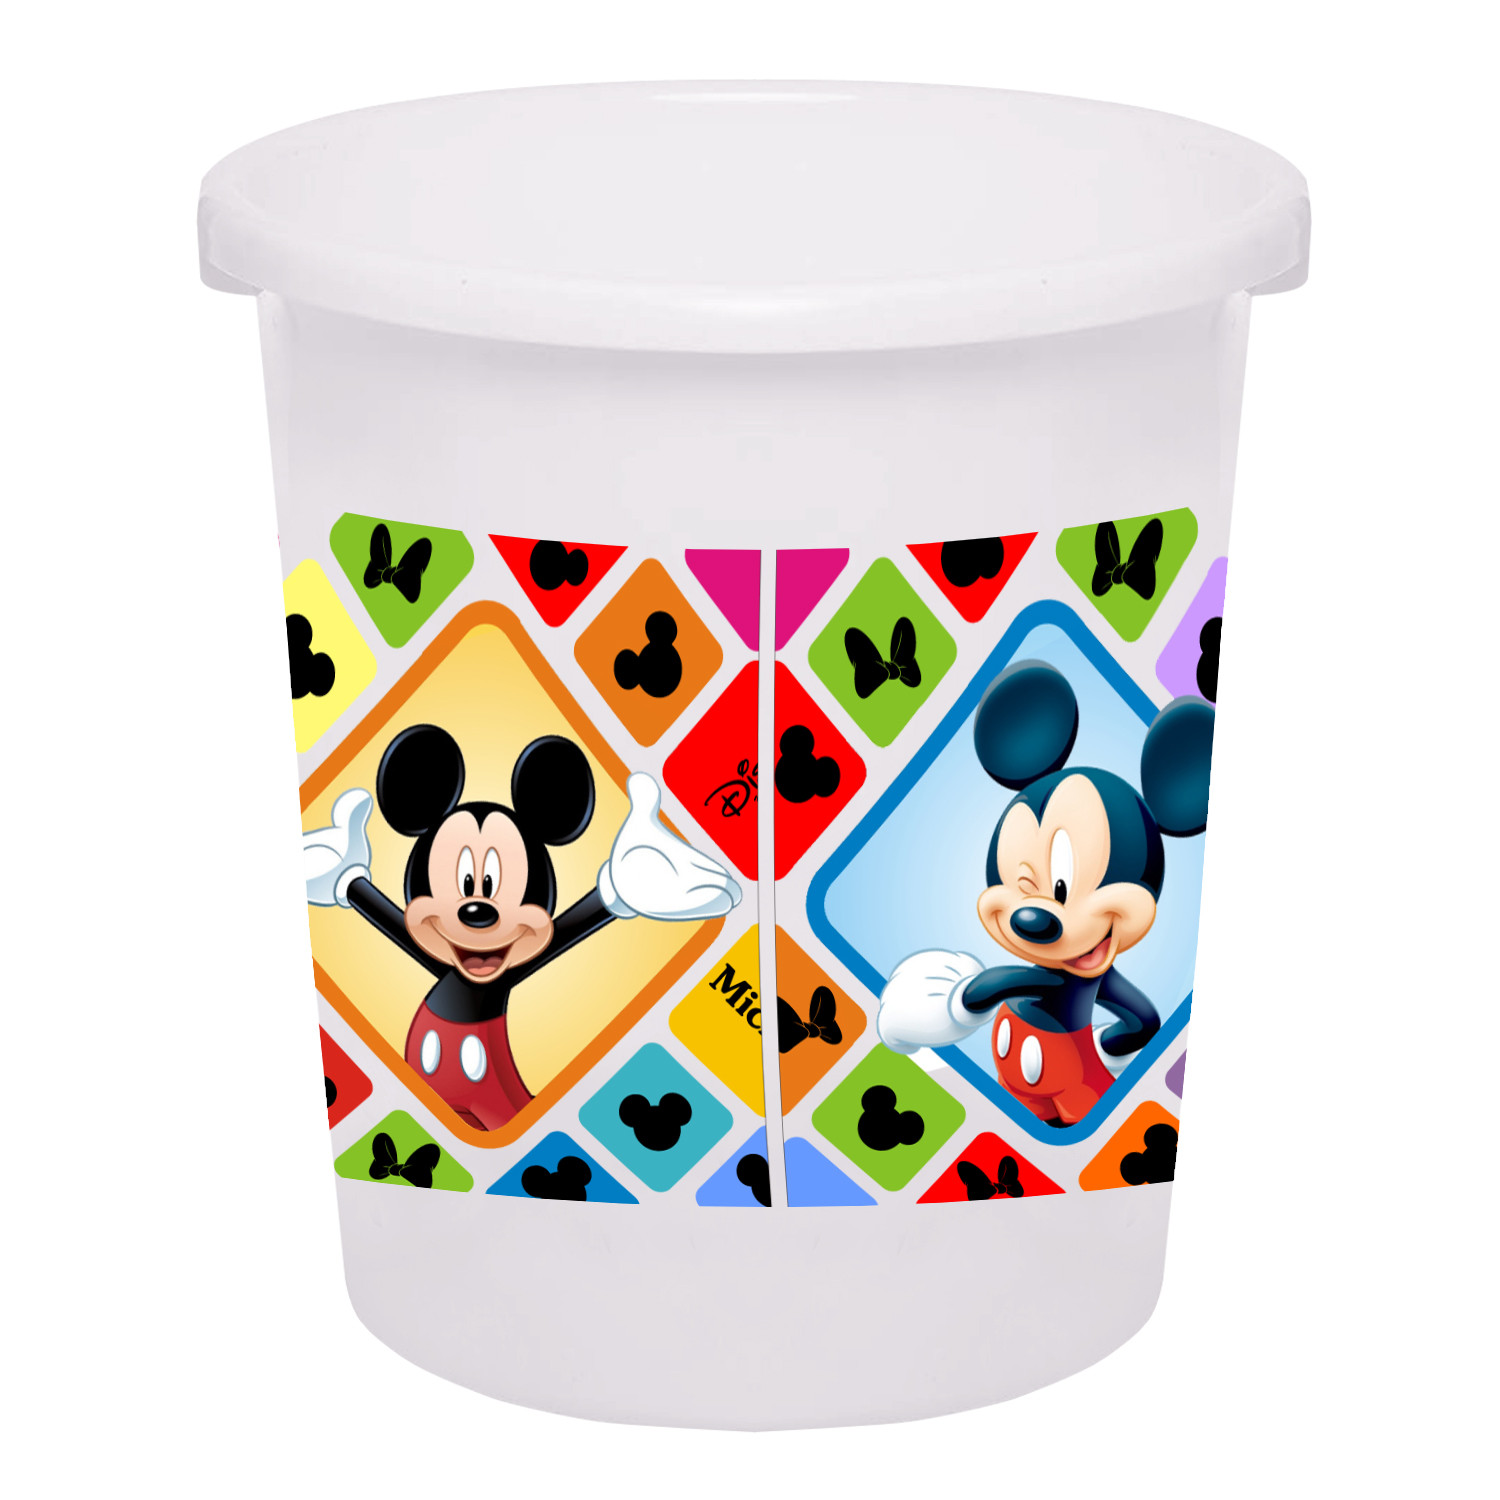 Kuber Industries Disney Mickey Minnie Print Plastic 2 Pieces Garbage Waste Dustbin/Recycling Bin for Home, Office, Factory, 5 Liters (Cream & White) -HS_35_KUBMART17797